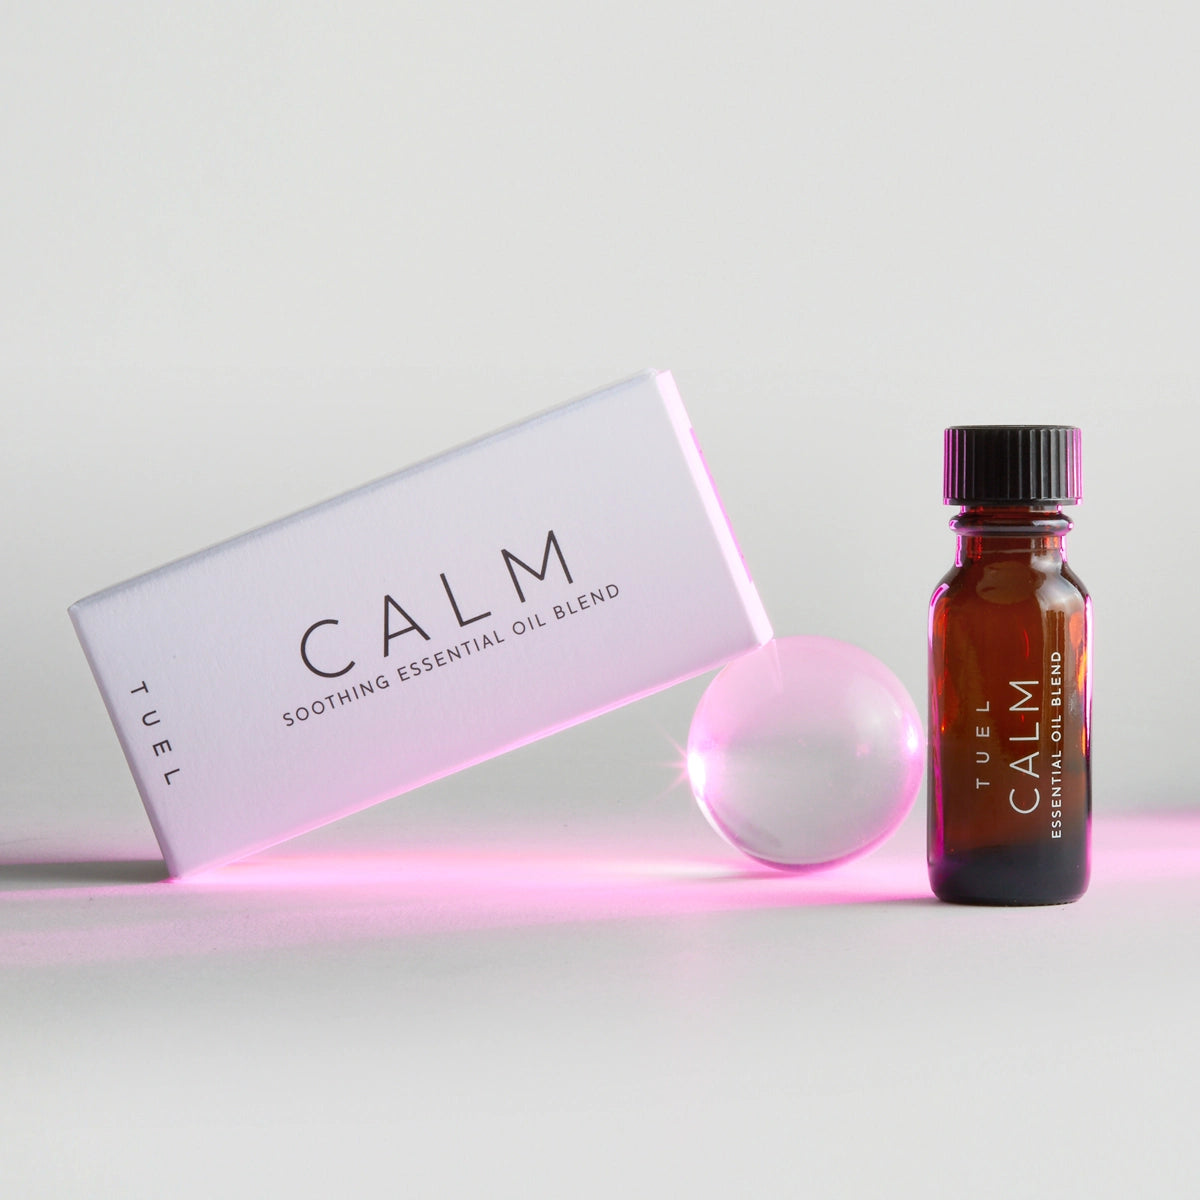 Tuel Calm Soothing Essential Oil Blend